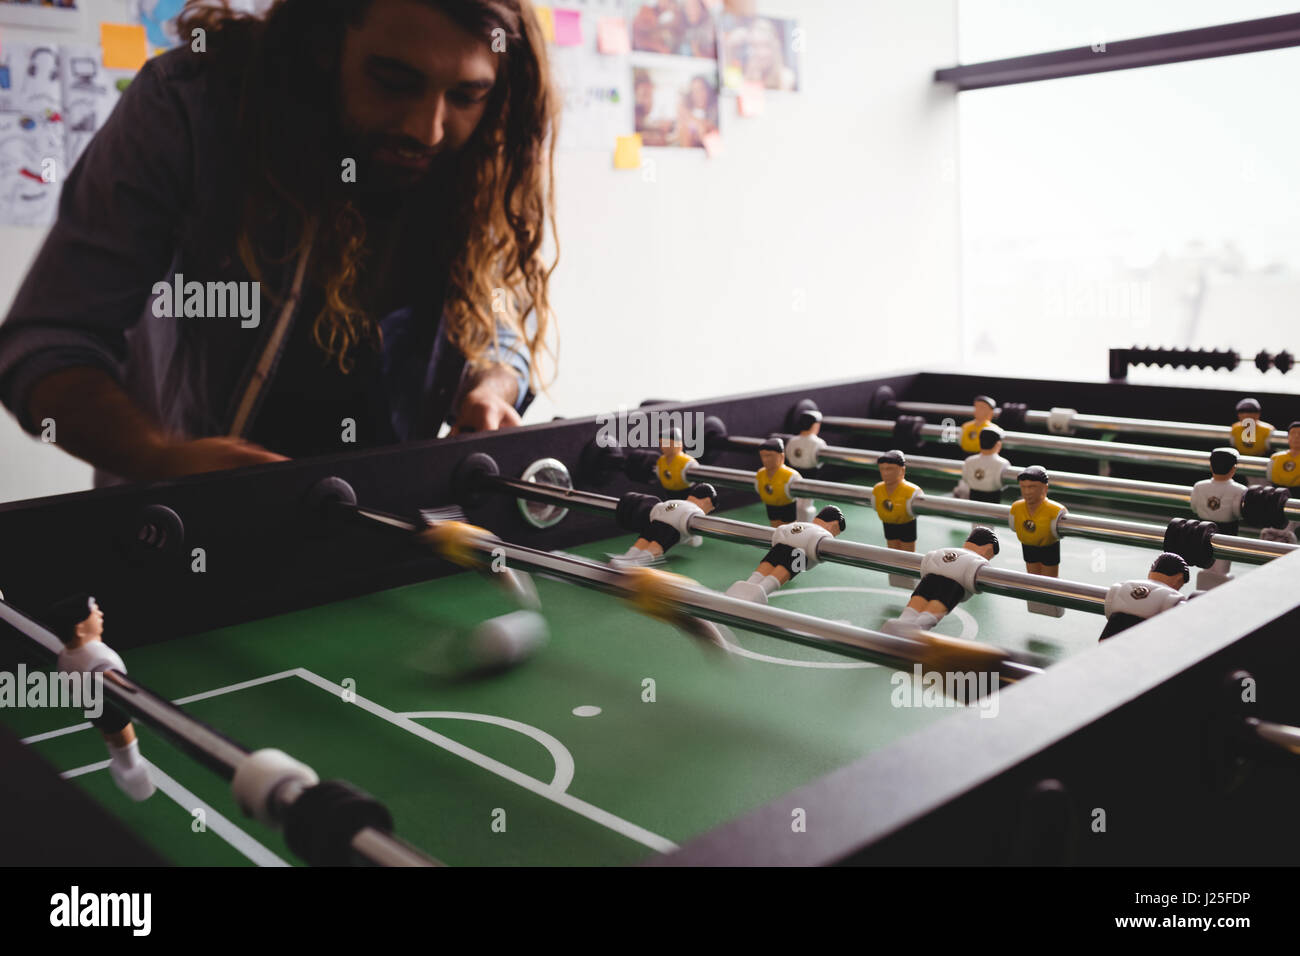 Homme concentré playing table football game Banque D'Images